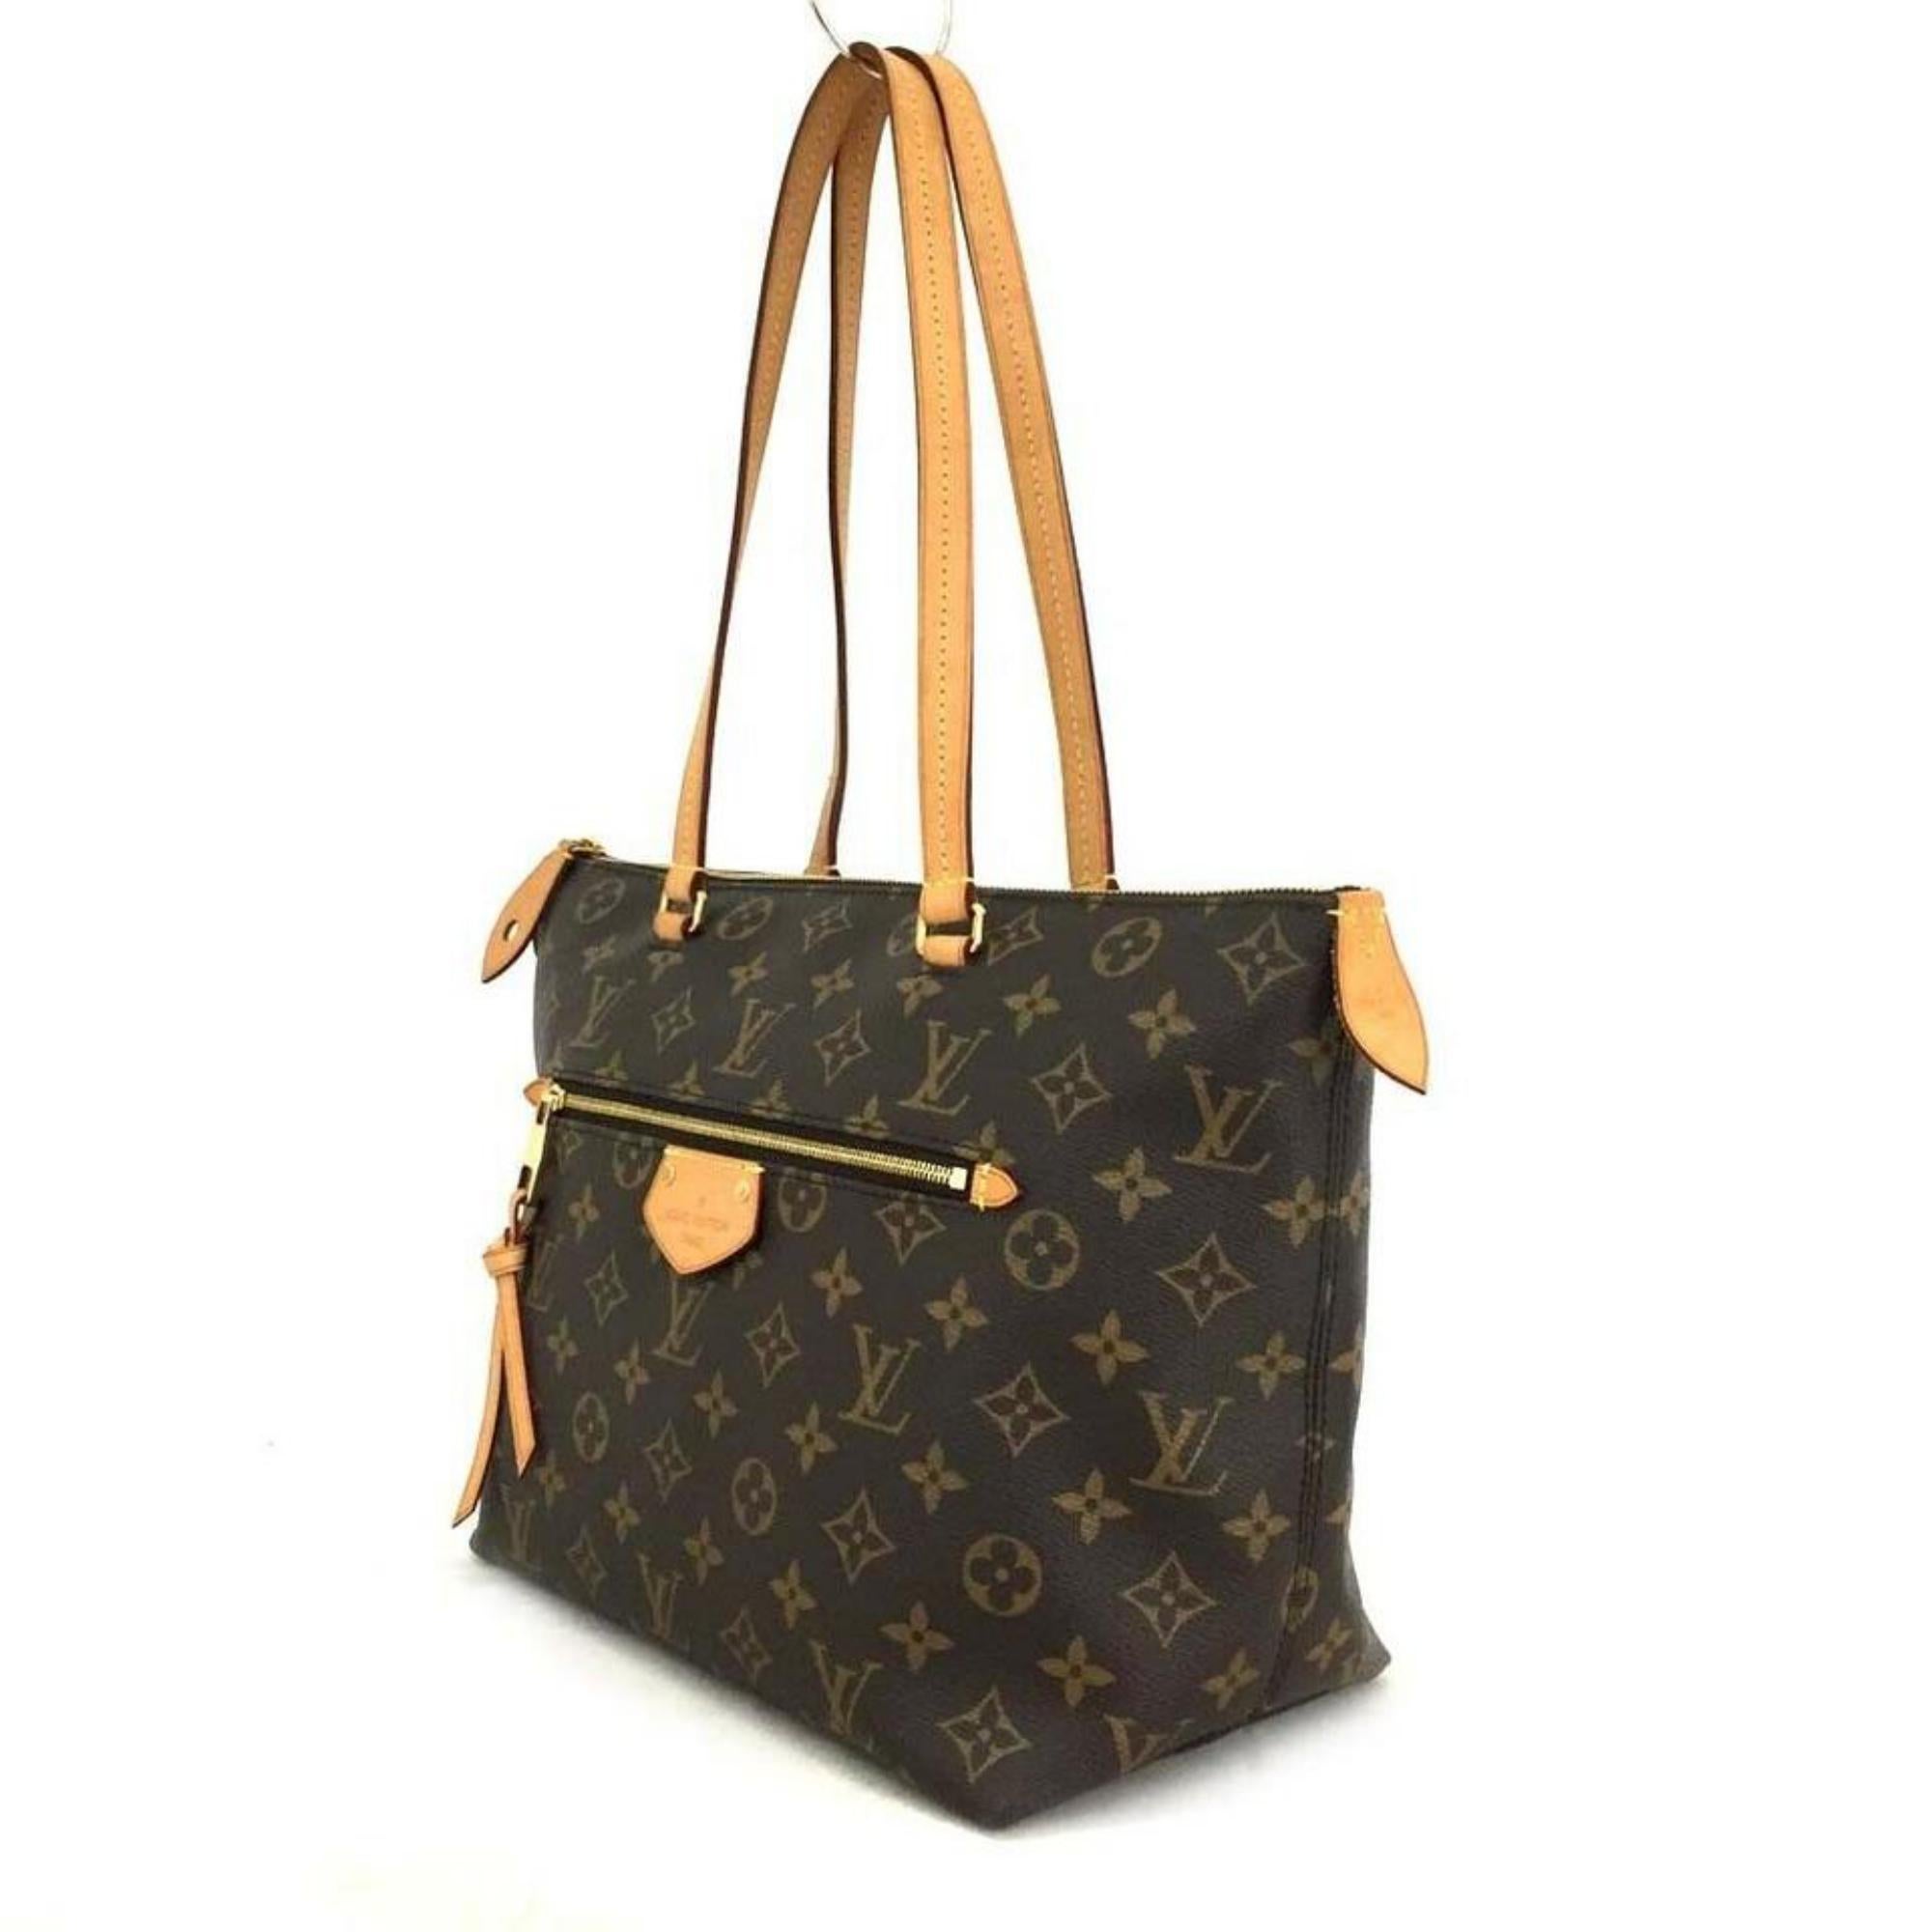 Size (approx)
Length 26 cm / 10.2 inches
Height 24 cm / 9.4 inches
Depth 15 cm / 5.9 inches
Shoulder Strap Drop(Hand Drop) cm / 0 inches
NO SIGNIFICANT WEAR
EXCELLENT+/LIKE NEW CONDITION
(9.5/10 or SA)
SKU : 870371 